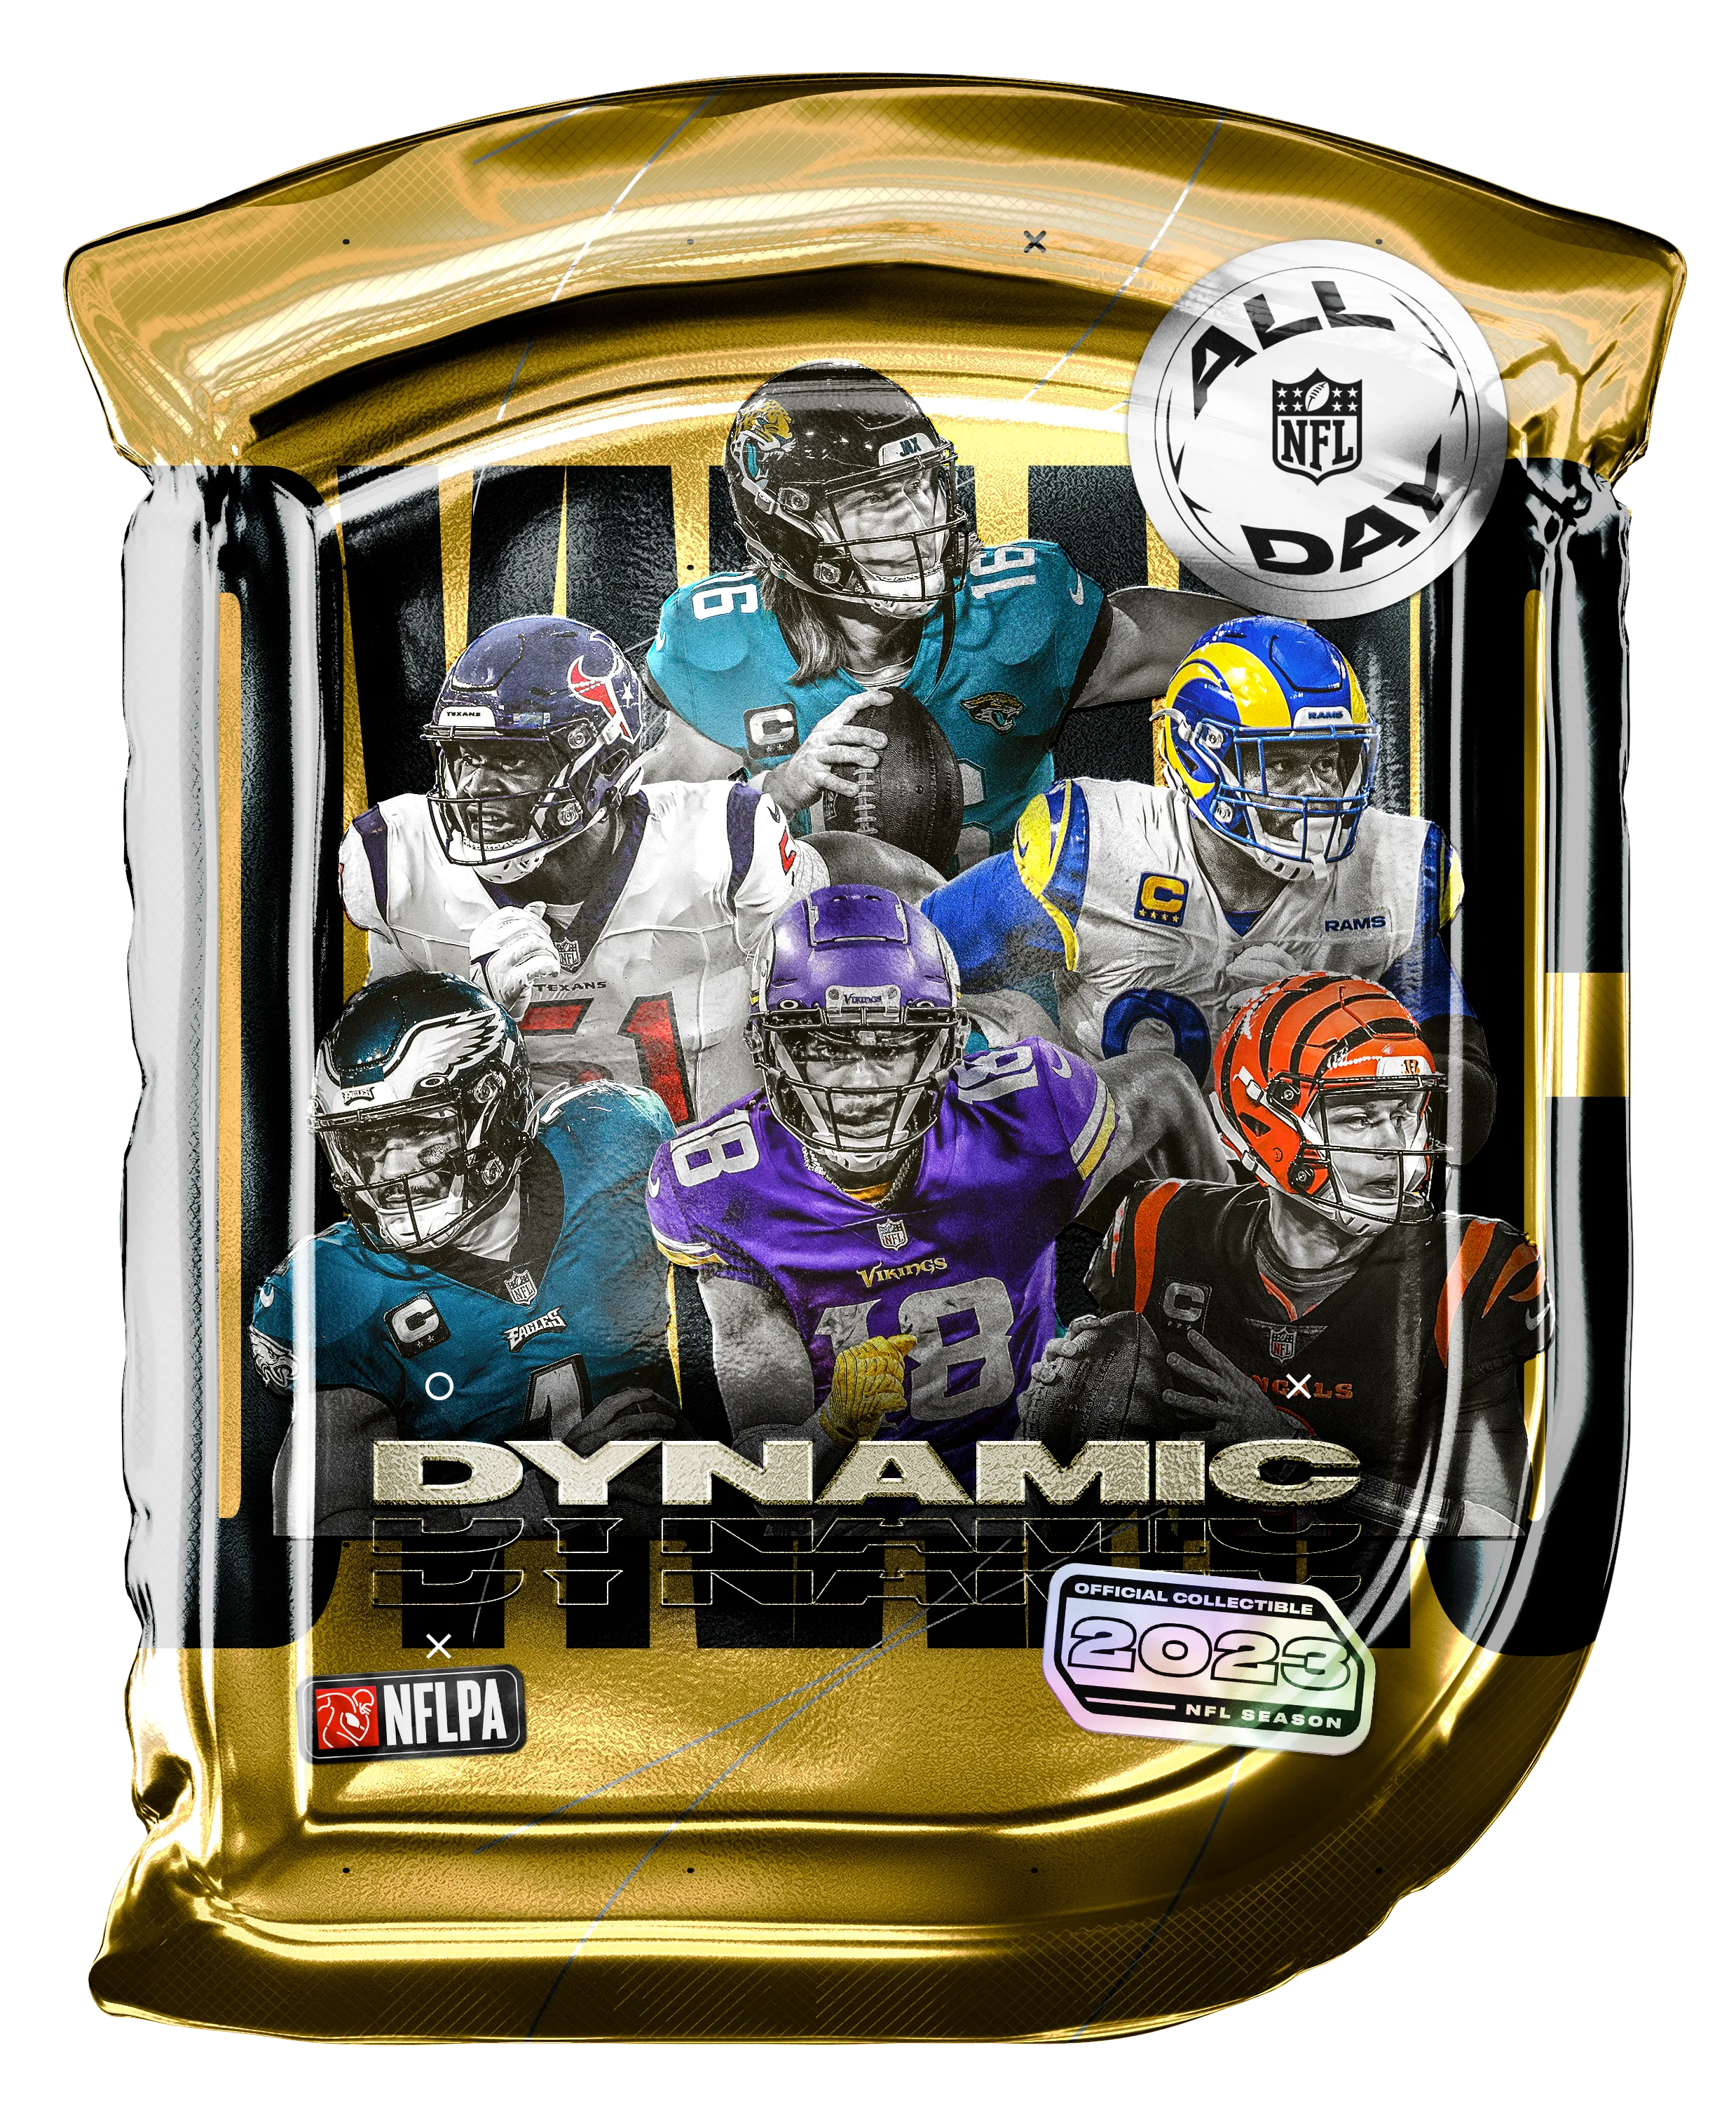 nflallday packs